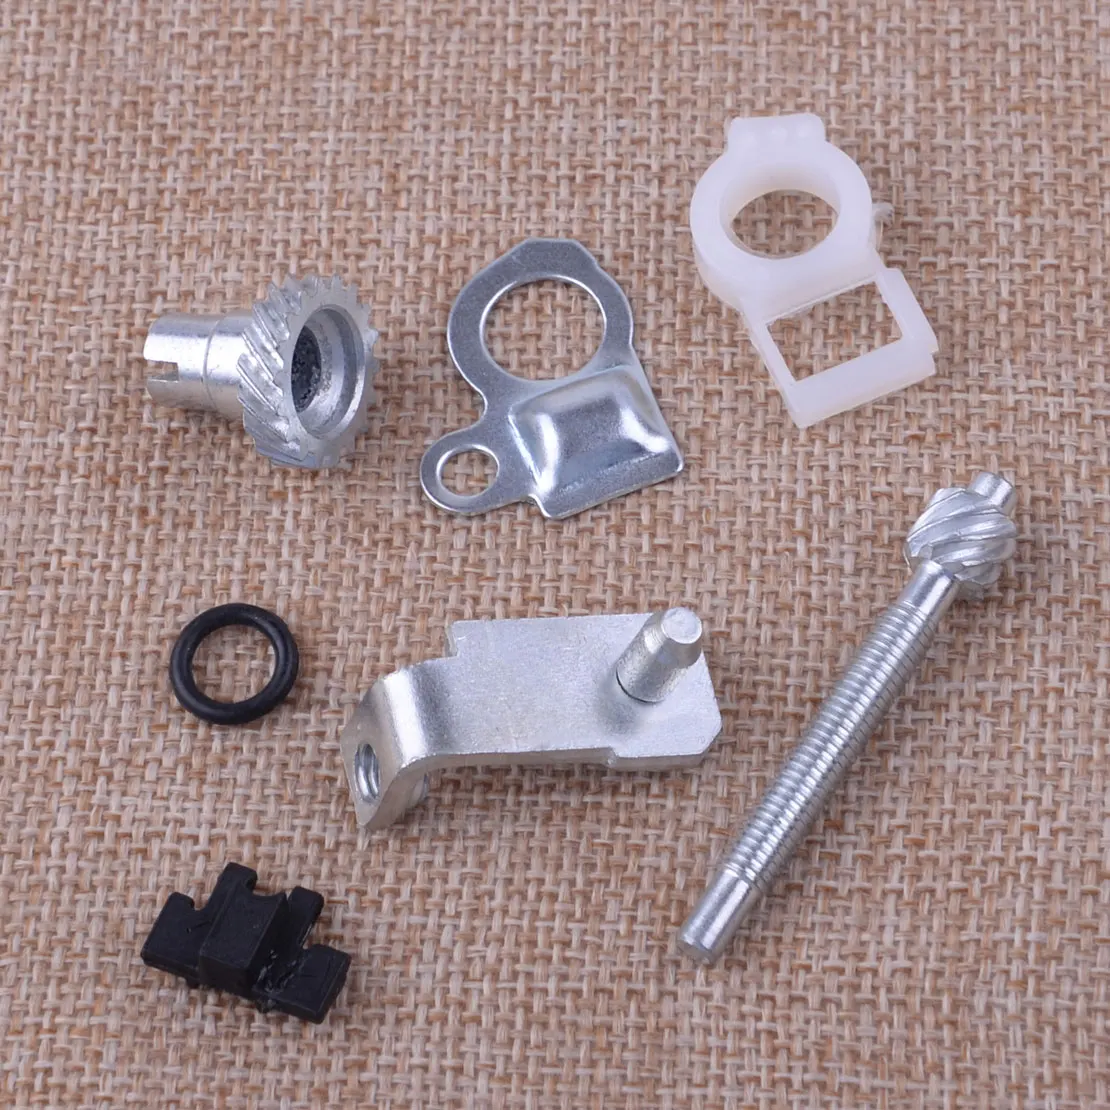 

LETAOSK 7pcs/kit Chain Adjuster Tensioner Screw Fit for Stihl 044 046 064 066 MS440 MS460 MS640 MS660